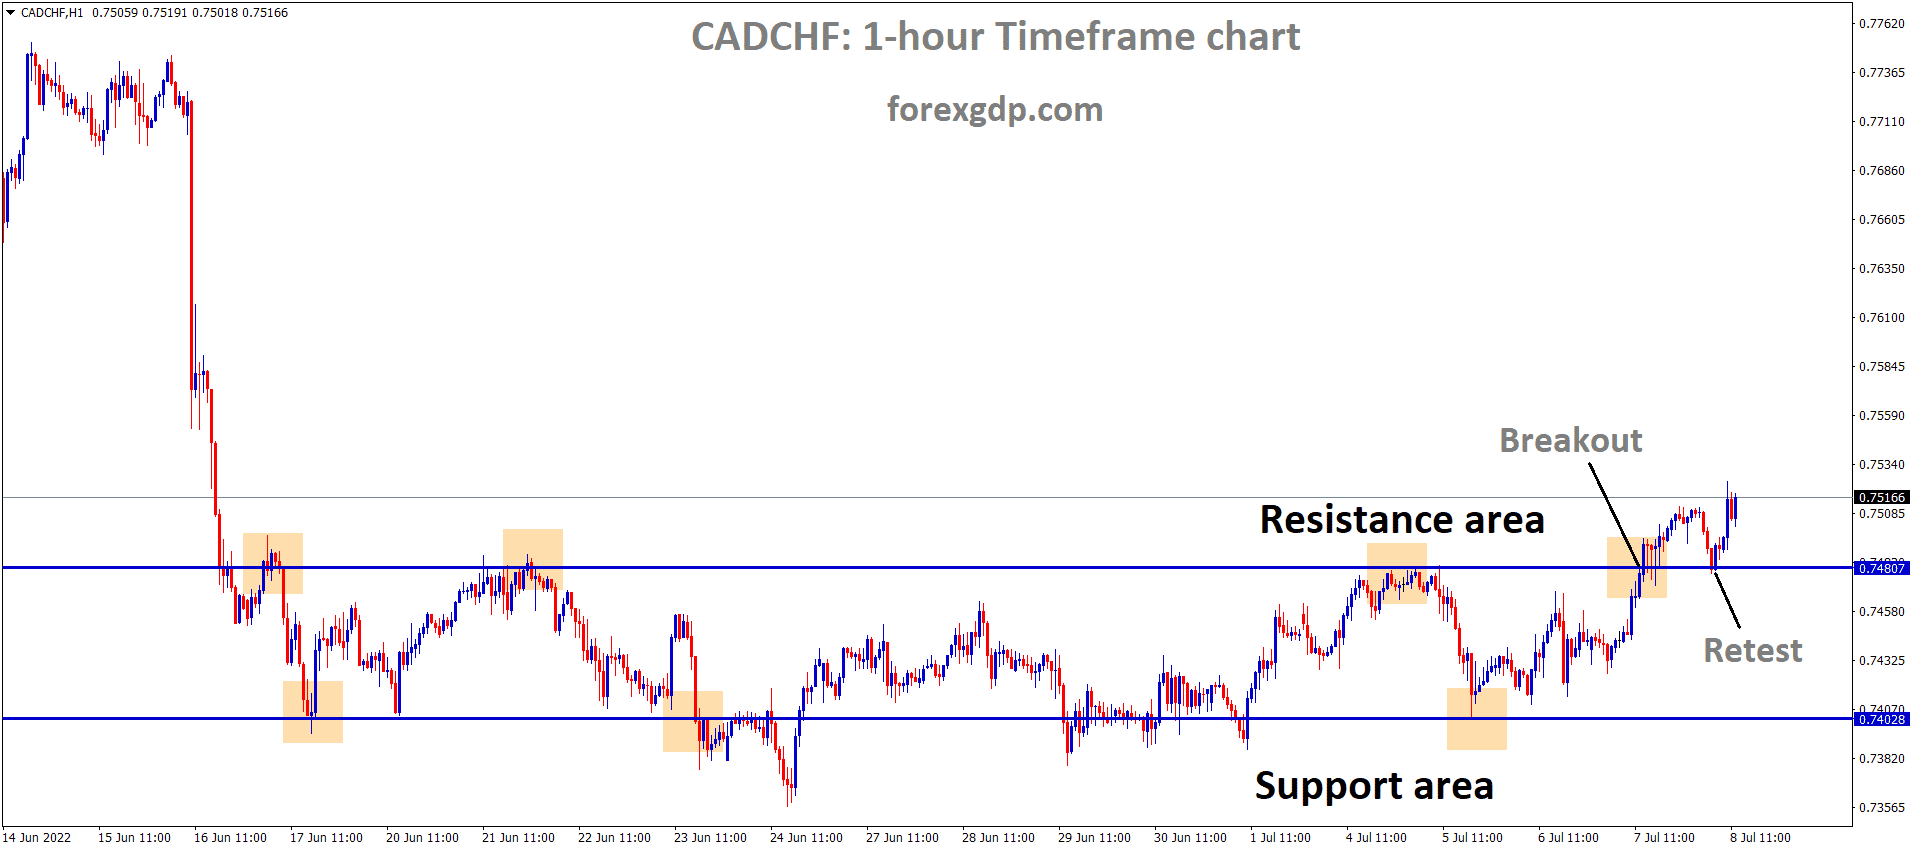 CADCHF has broken the Box Pattern and the Market has retested the broken area and rebounded from the Horizontal support area of the Pattern.